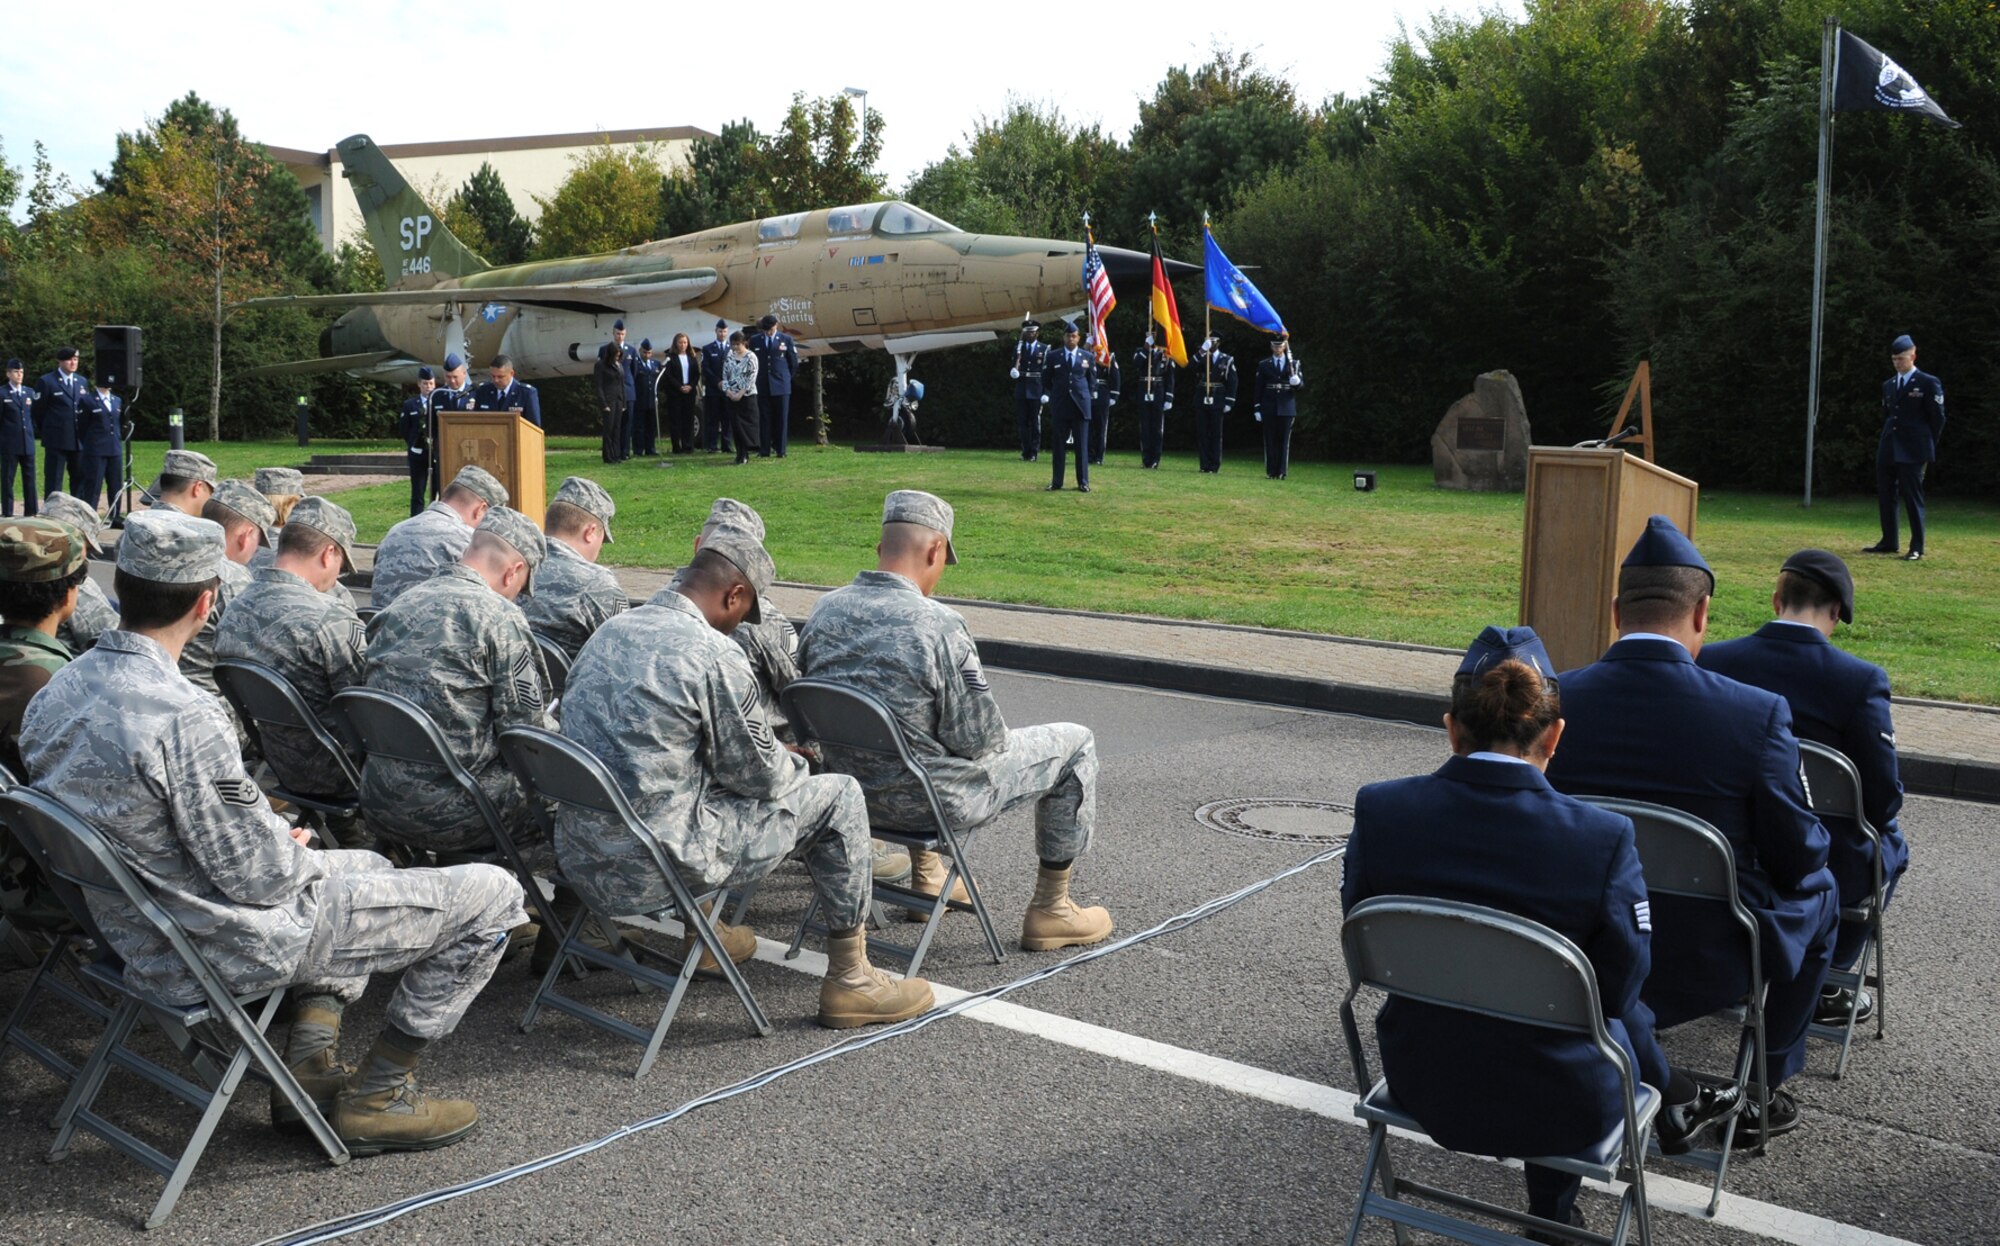 SPANGDAHLEM AIR BASE, Germany -- Chaplain (Capt.) Gabriel Rios, 52nd Fighter Wing, gives the invocation during the POW/MIA ceremony at the Air Park Sept. 18. About 200 members of the 52nd Fighter Wing came to the ceremony to honor and remember servicemembers listed as prisoners of war or missing in action. (U.S. Air Force photo/Airman 1st Class Nathanael Callon)